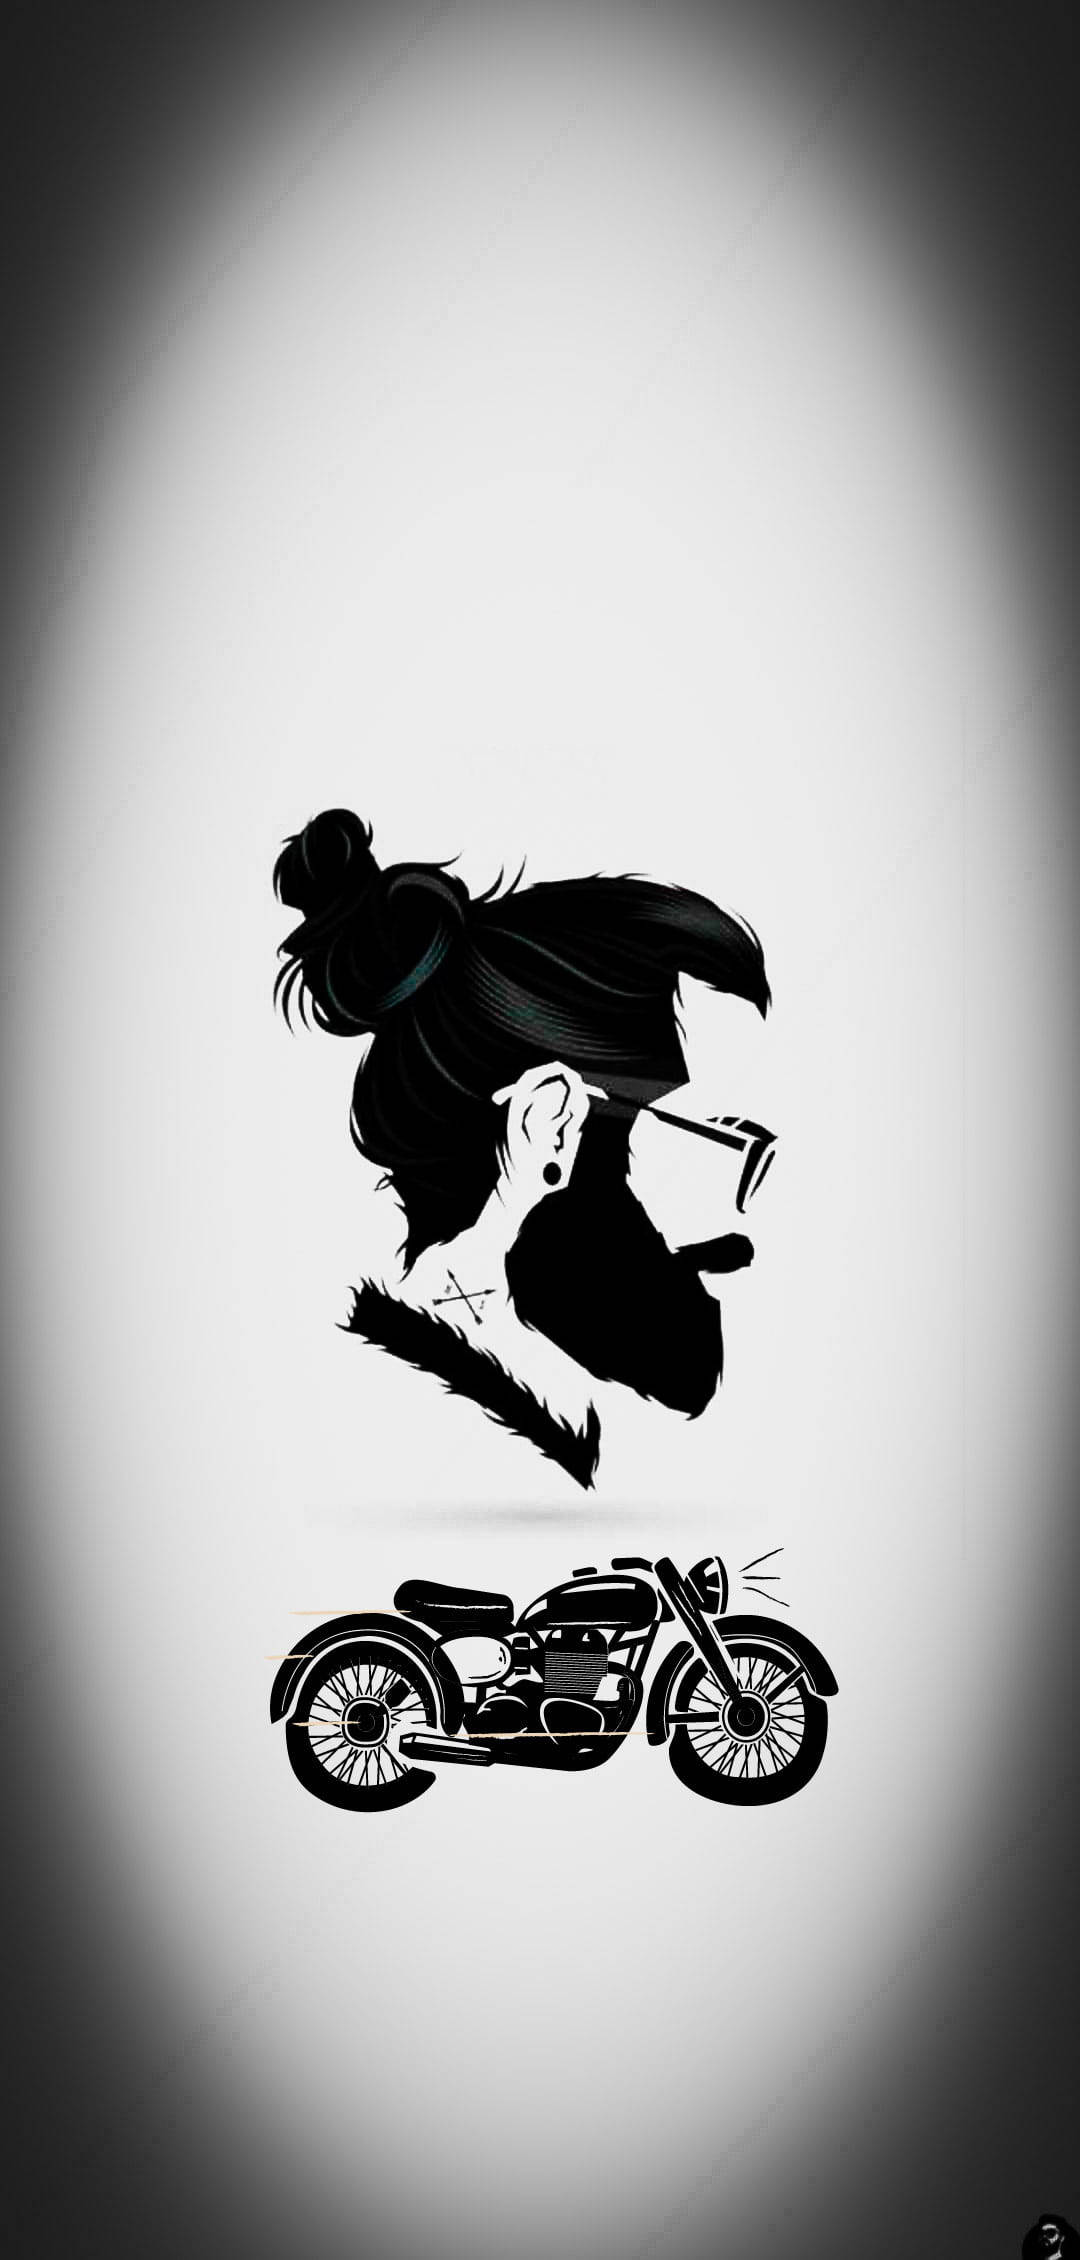 Striking Side-angle Beard Logo Paired With Motorcycle, Embodying Masculinity And Freedom Wallpaper